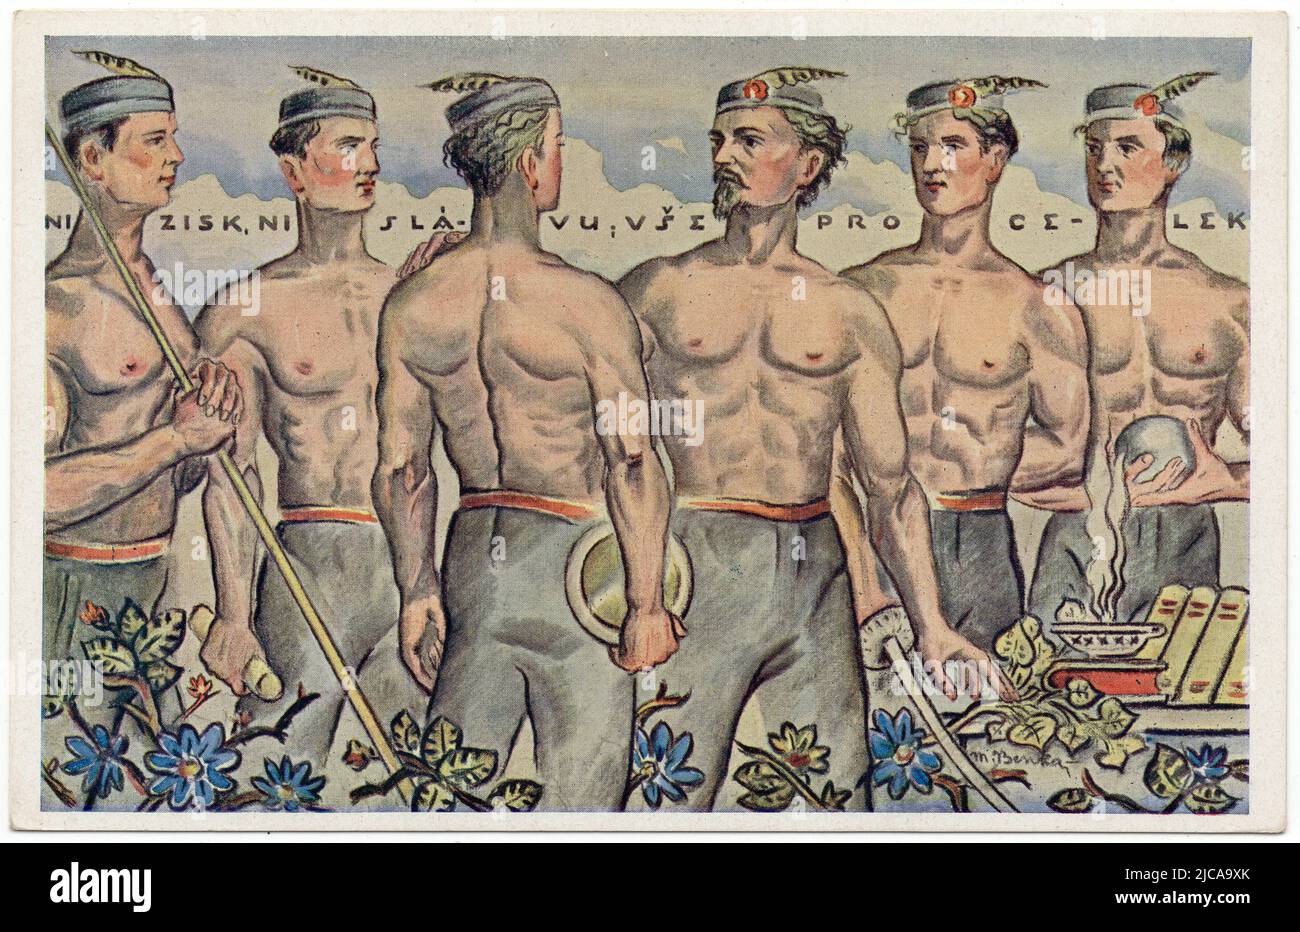 Muscular shirtless athletes depicted by Slovak artist Martin Benka published in the Czechoslovak vintage postcard issued in occasion of the 9th Sokol mass gymnastics festival (IX. všesokolský slet) in 1932. The bearded man depicted in the centre is Czech sports organizer Miroslav Tyrš, known as the founder of the Sokol movement. The 9th Sokol mass gymnastics festival was dedicated to the 100th anniversary of Miroslav Tyrš. Courtesy of the Azoor Postcard Collection. Stock Photo